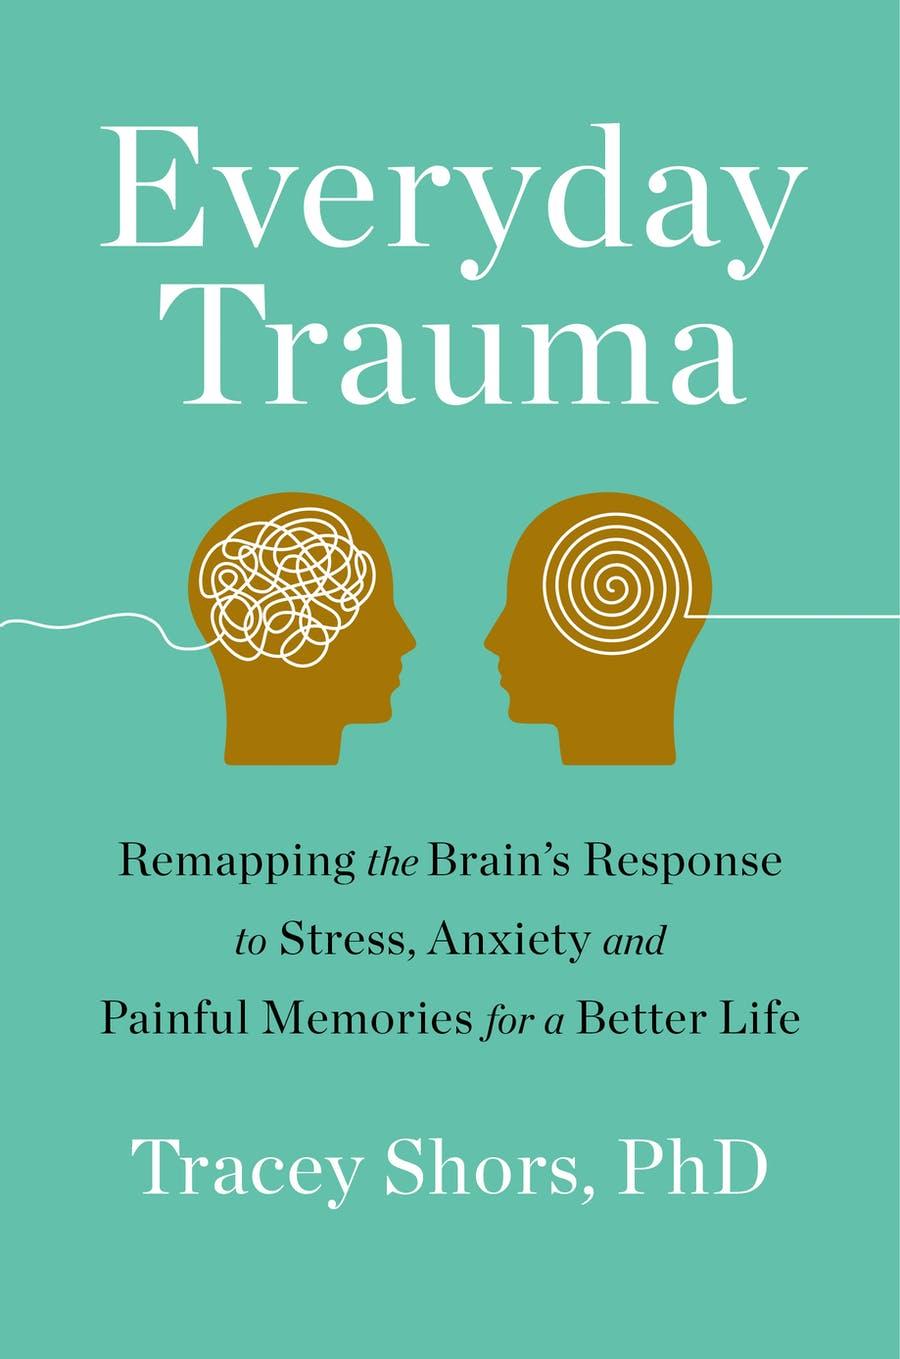  Dr. Tracey Shors’ book “Everyday Trauma” addresses the implications of trauma in every day life.